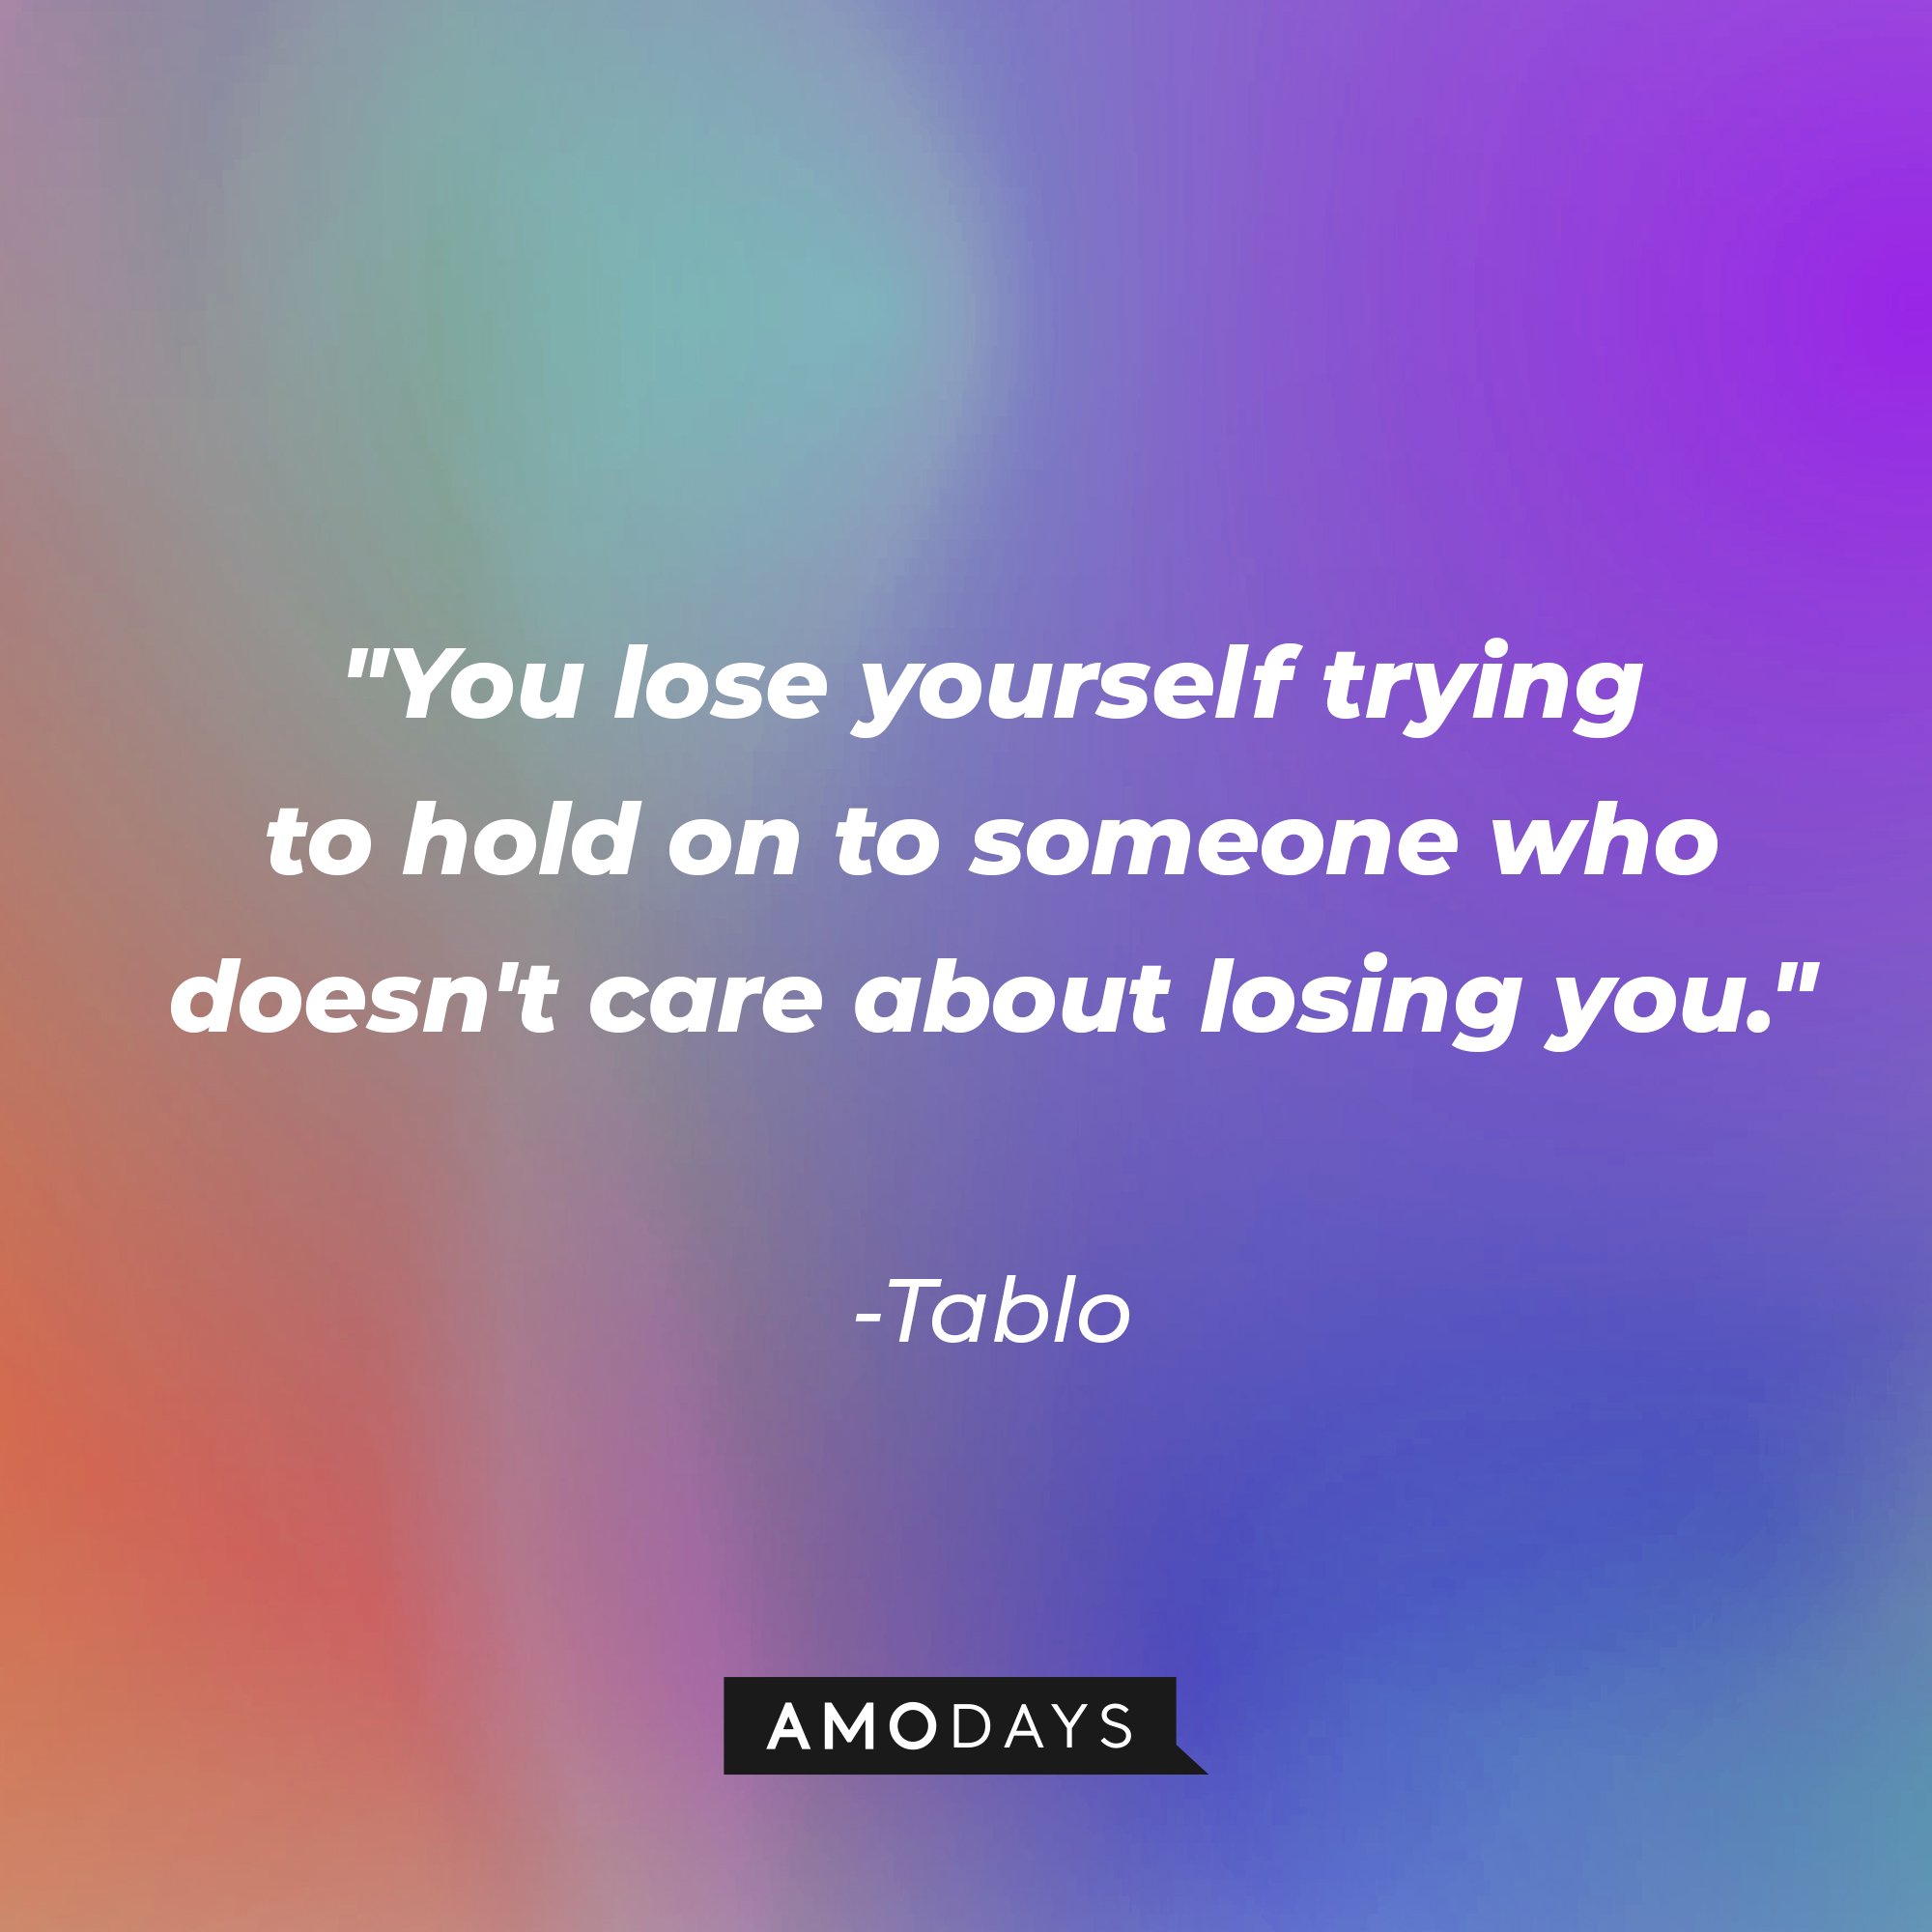 Tablo's quote: "You lose yourself trying to hold on to someone who doesn't care about losing you." | Image: AmoDays